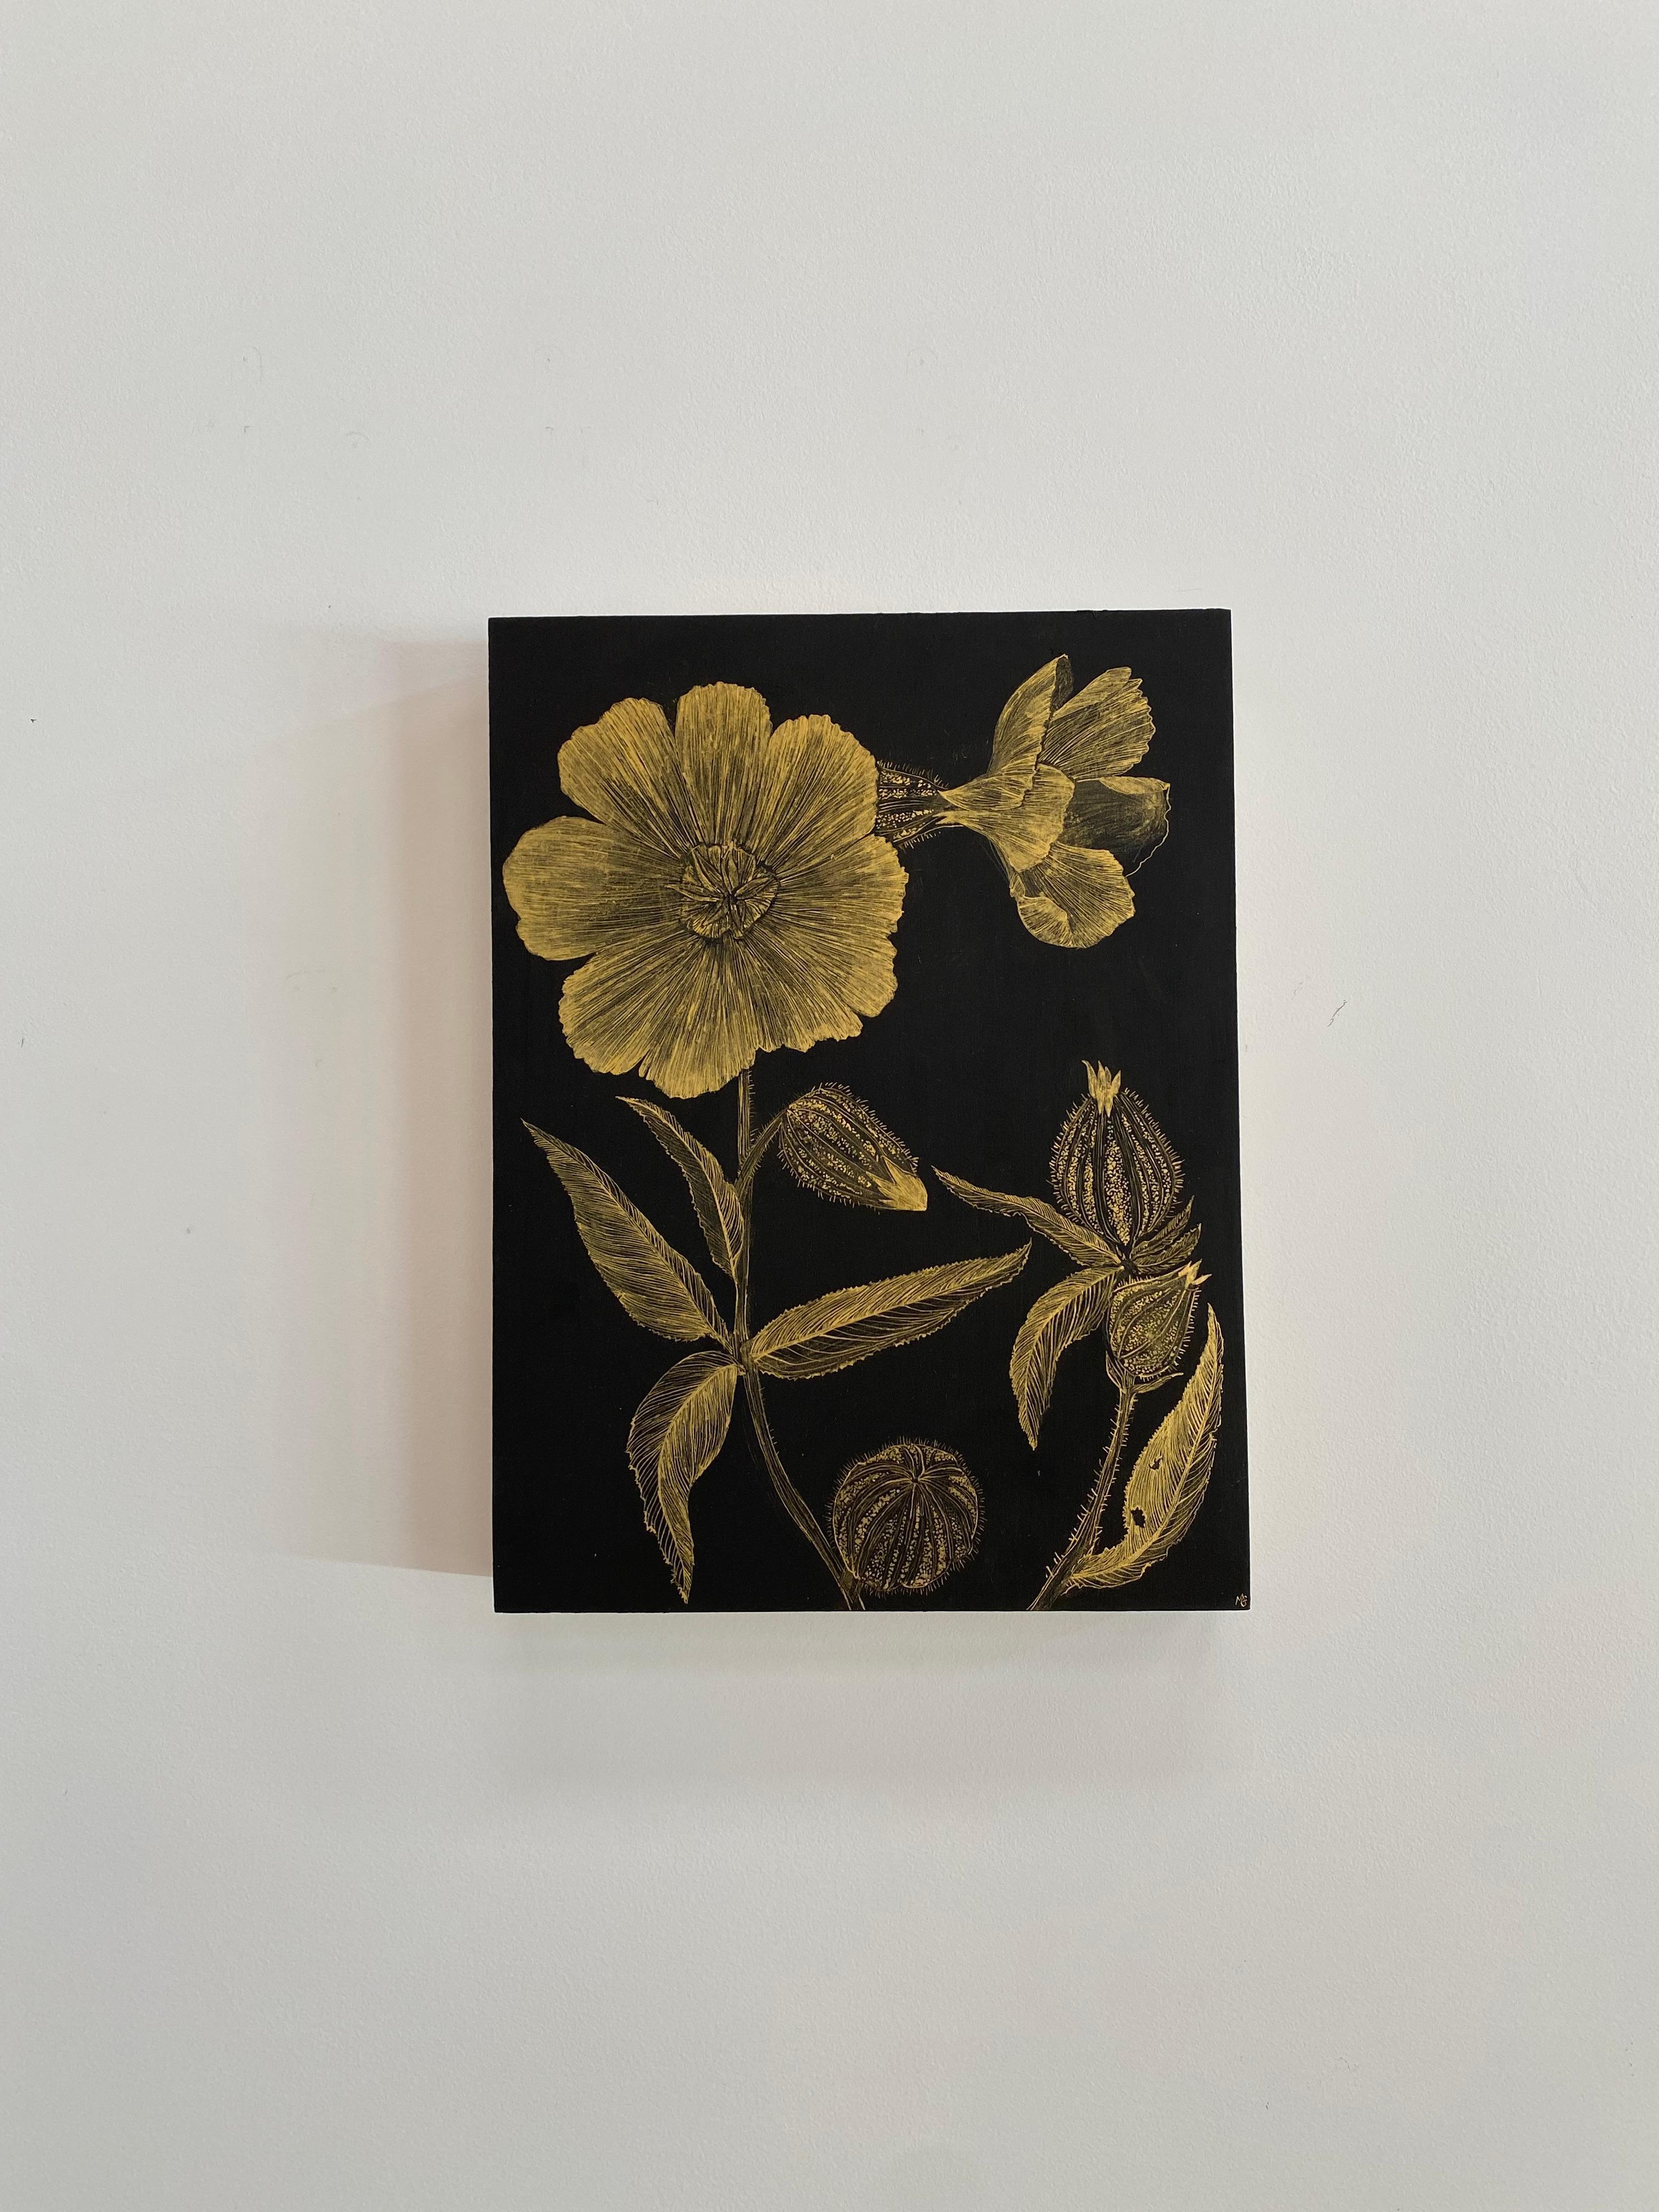 Marshmallow Two, Gold Flowers, Leaves Stem, Metallic Botanical Painting on Black For Sale 1